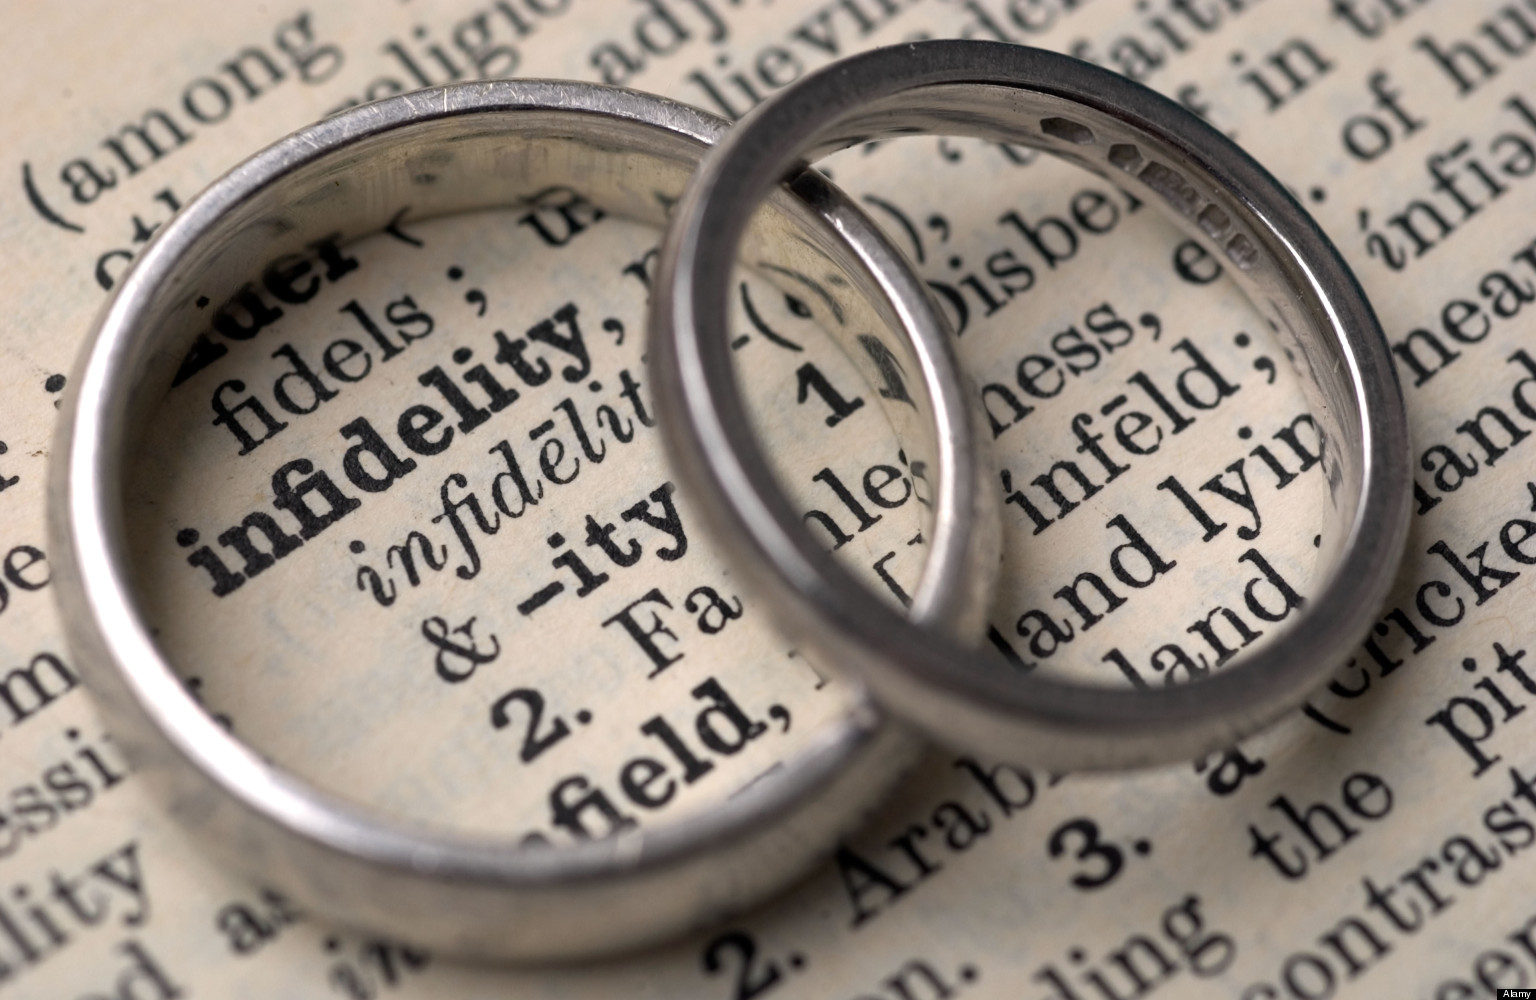 A3G275 Wedding rings on a dictionary showing the word infidelity